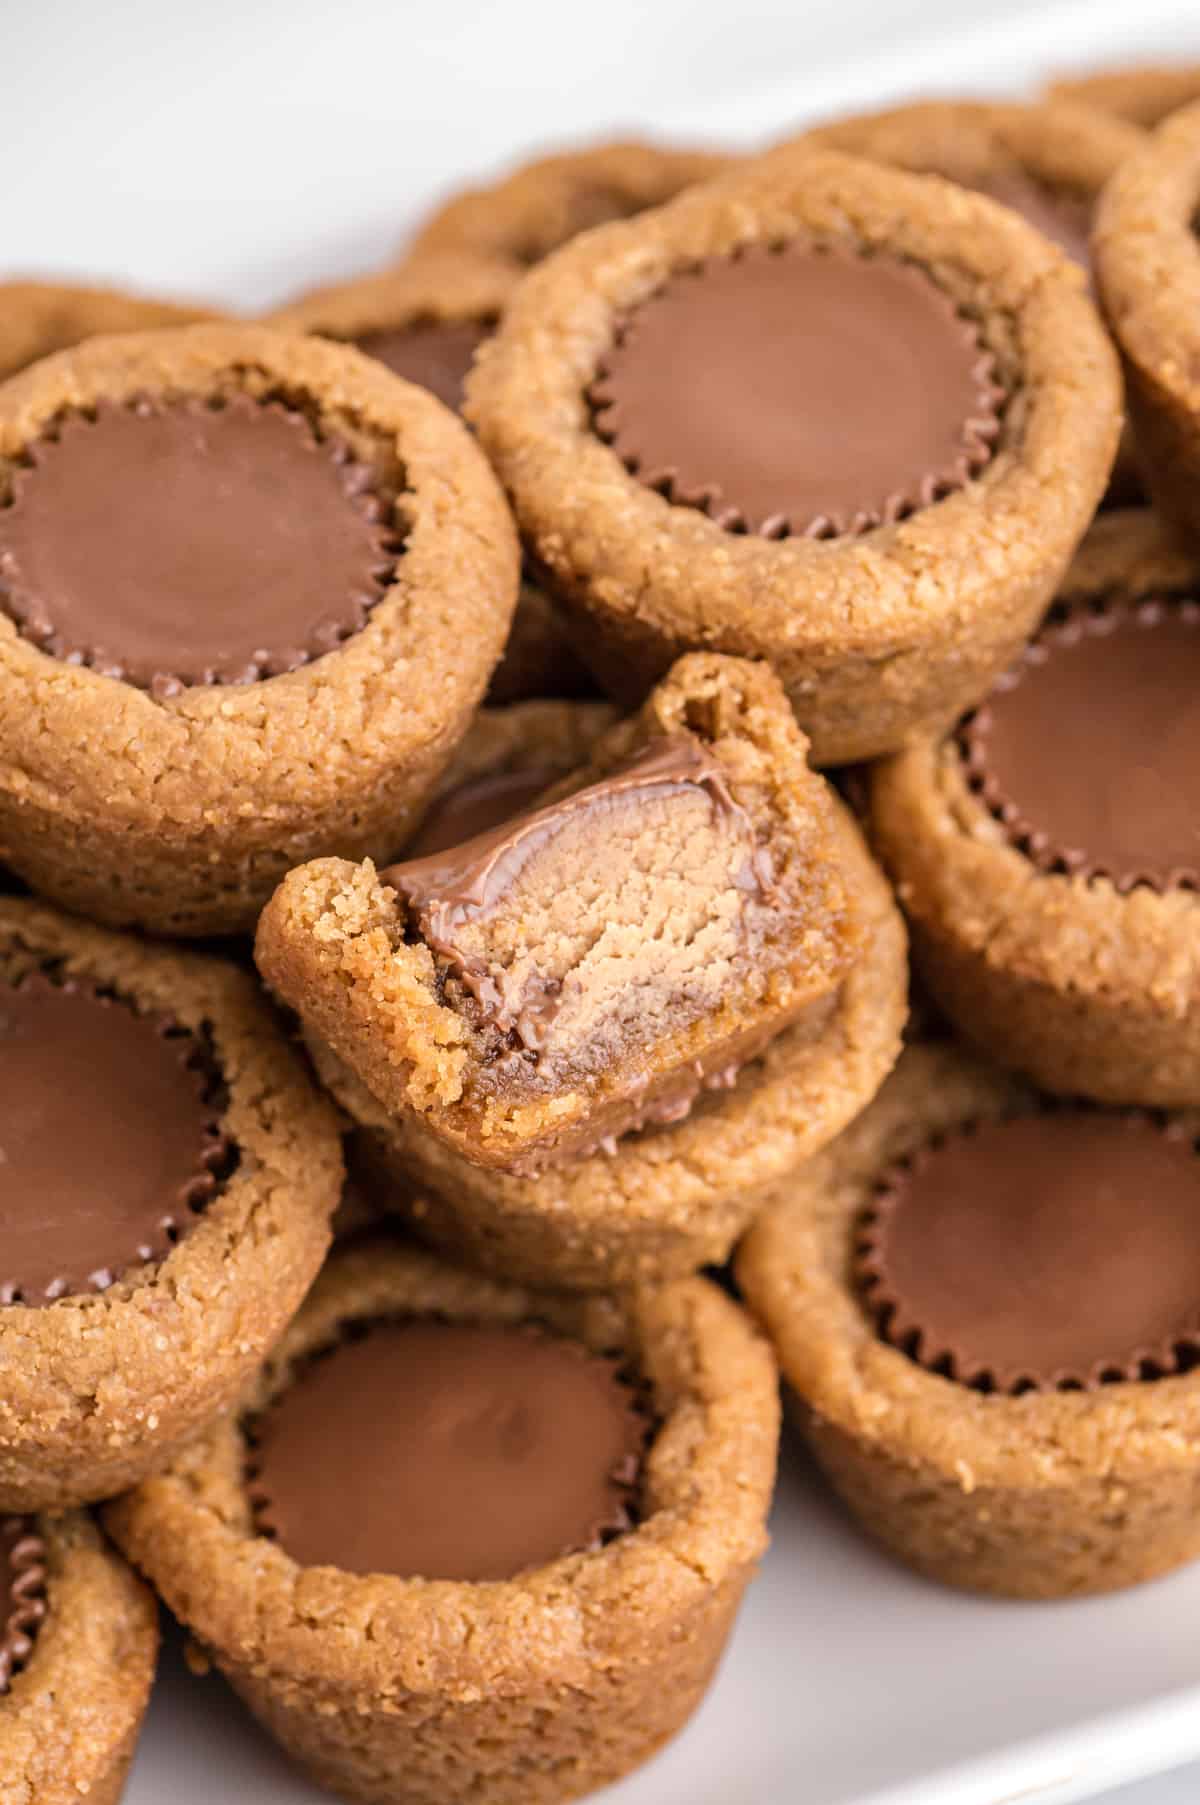 Peanut Butter Cup Cookies with a mini reese's cup in the center. One had bite taken out of it to show inside of reese's peanut butter cup.